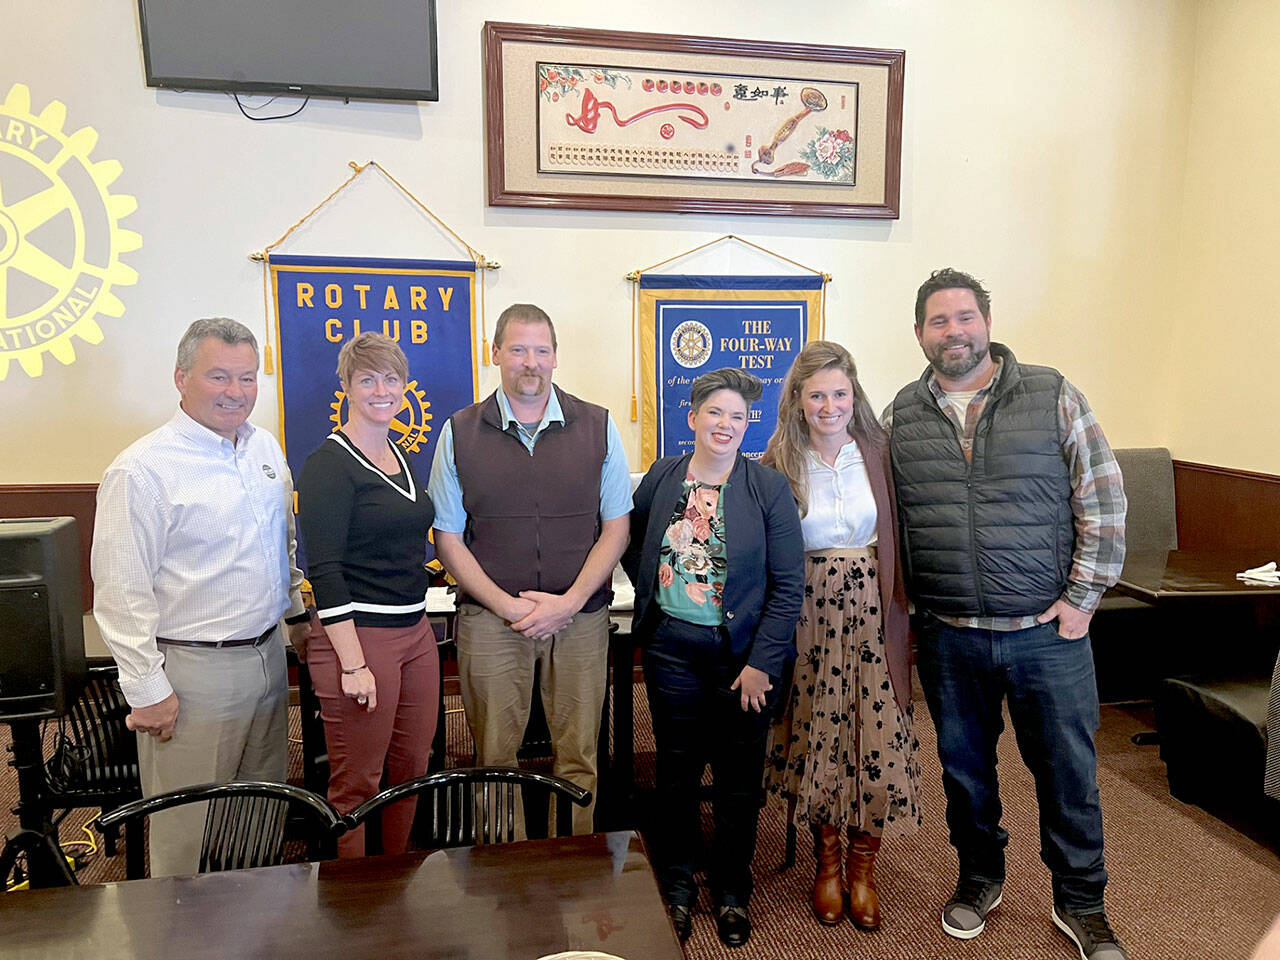 Port Angeles City Council candidates Jim Haguewood, Amy Miller, Mark Karjalainen, Navarra Carr, Kalli Jones and Brenden Meyer spoke at a meeting of the Port Angeles Noon Rotary on Wednesday, taking questions from the audience about their priorities for the city. (Peter Segall/Peninsula Daily News)